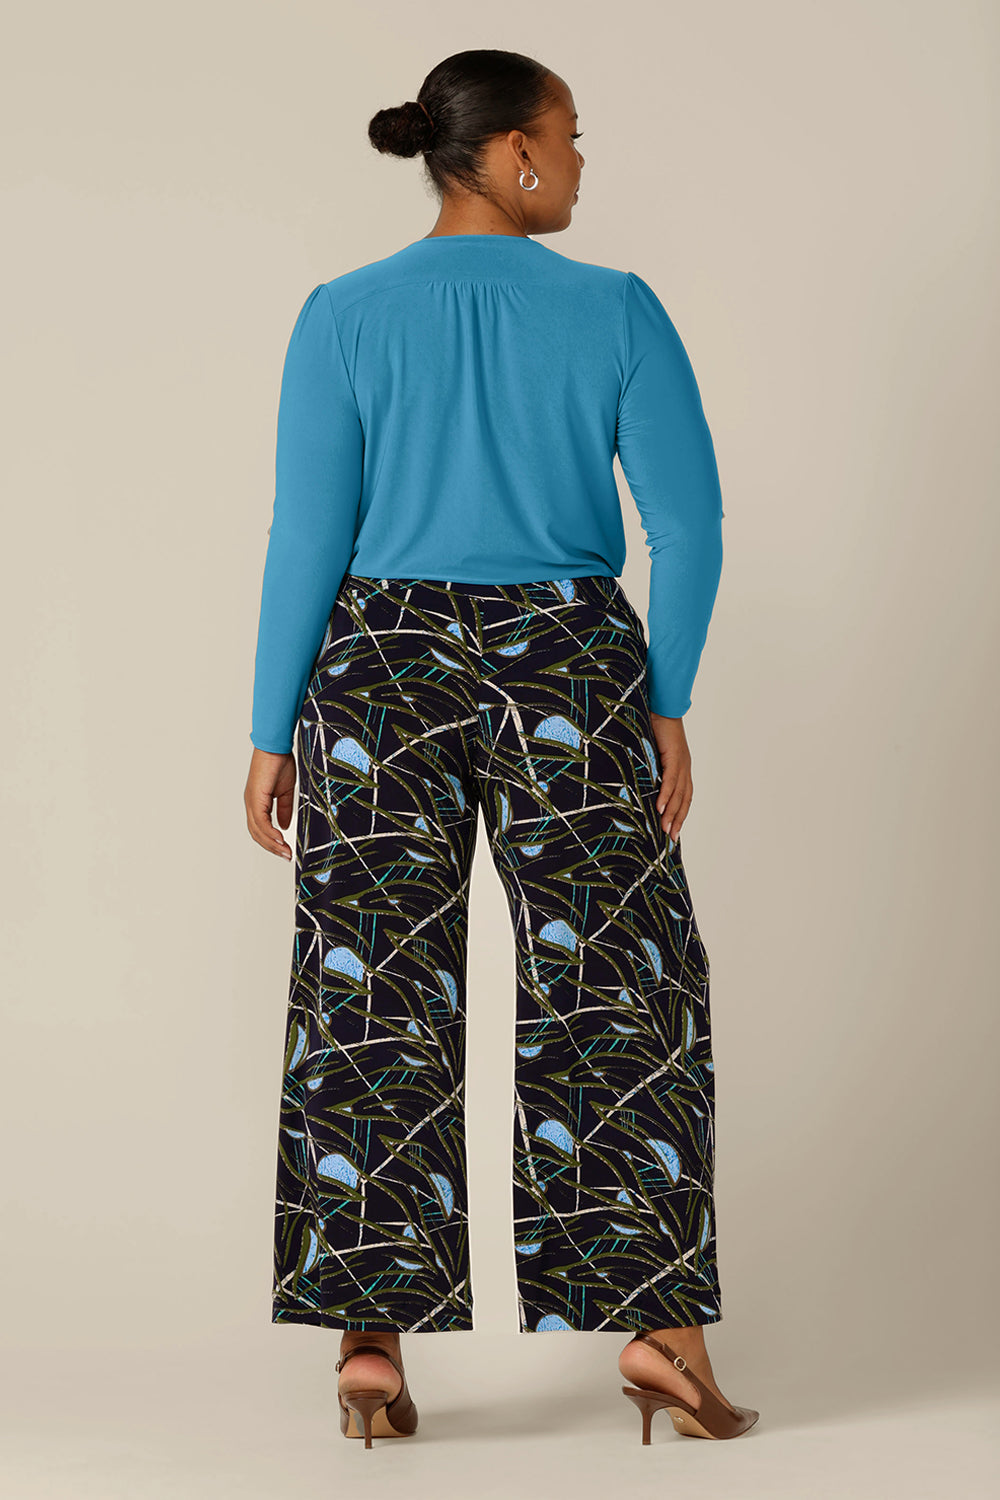 Back view of a plus size, size 18 woman wearing a long sleeve, V-neck top in Opal blue jersey with wide-leg, printed pants. Made in Australia by Australian and New Zealand women's clothing company, L&F, this top is available for shipping in sizes 8 to 24.